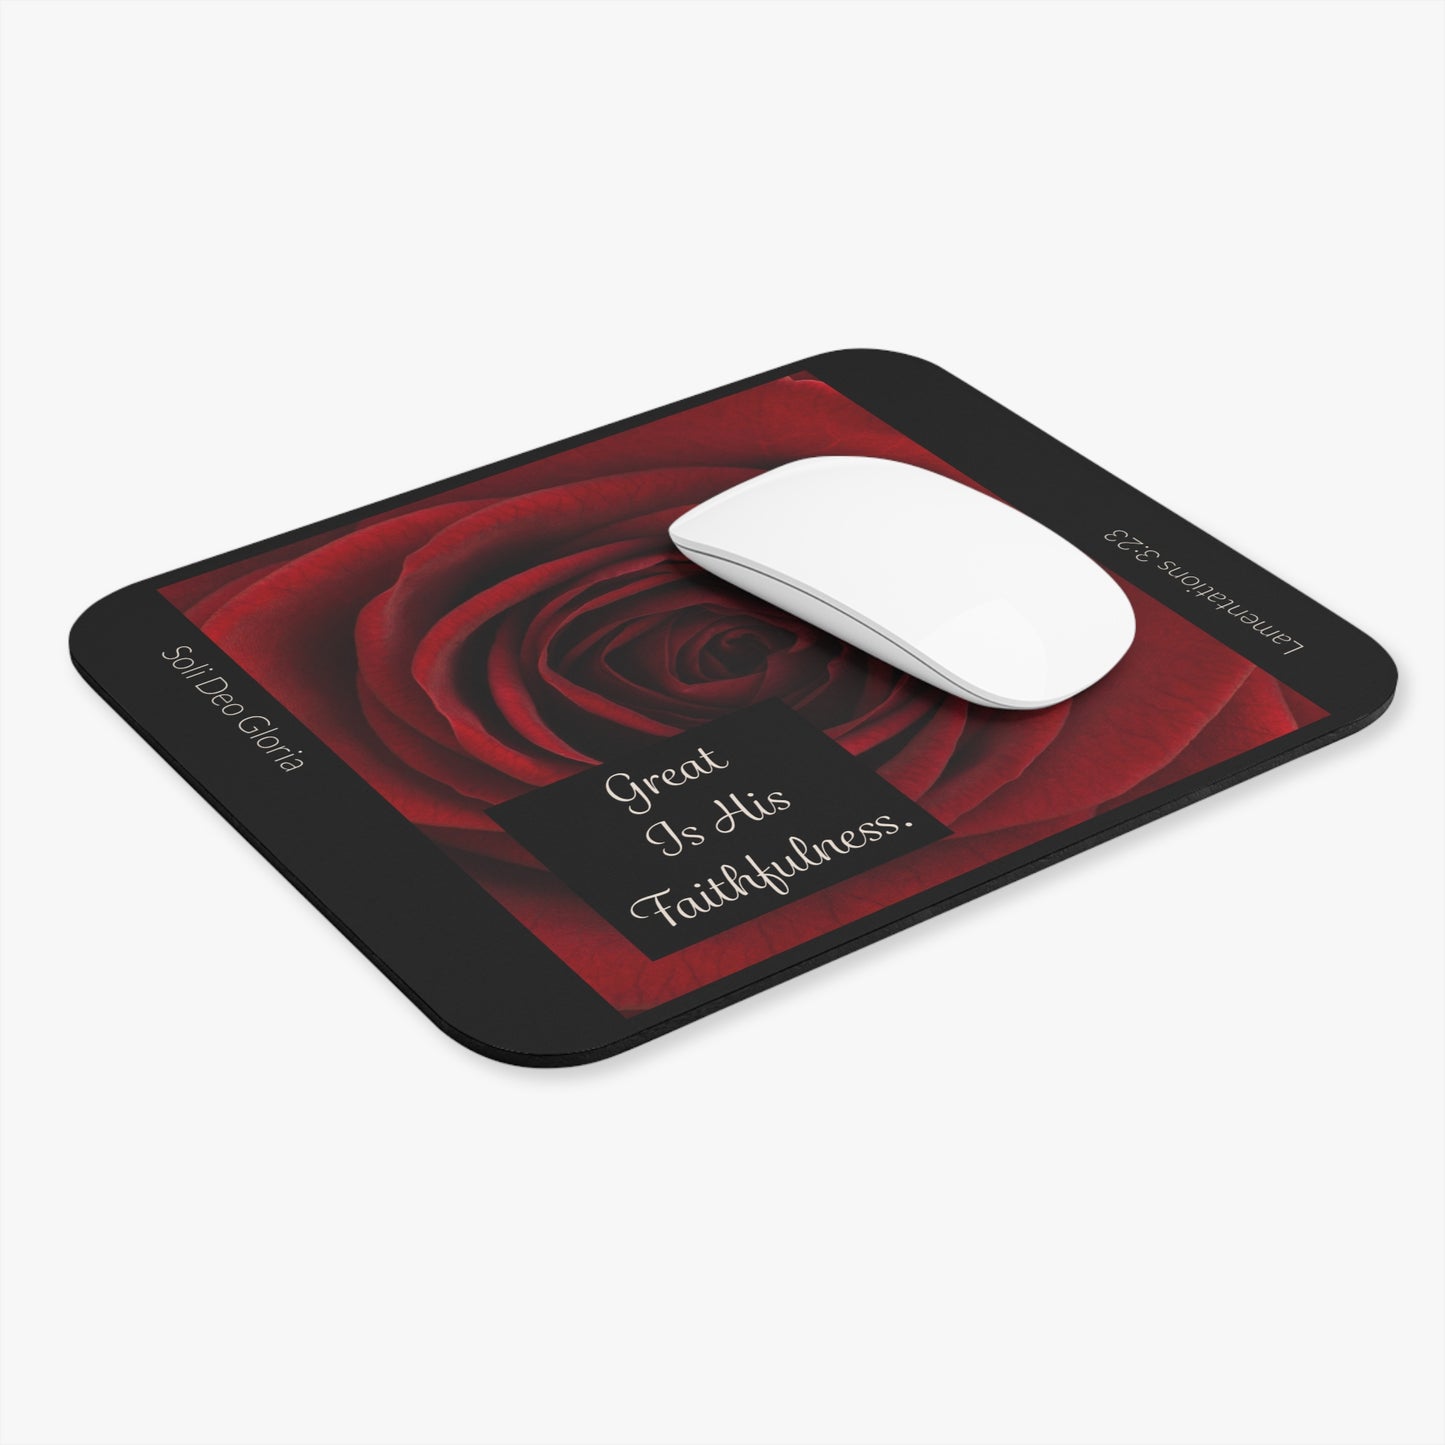 Mouse Pad - Red Rose - Great Is His Faithfulness